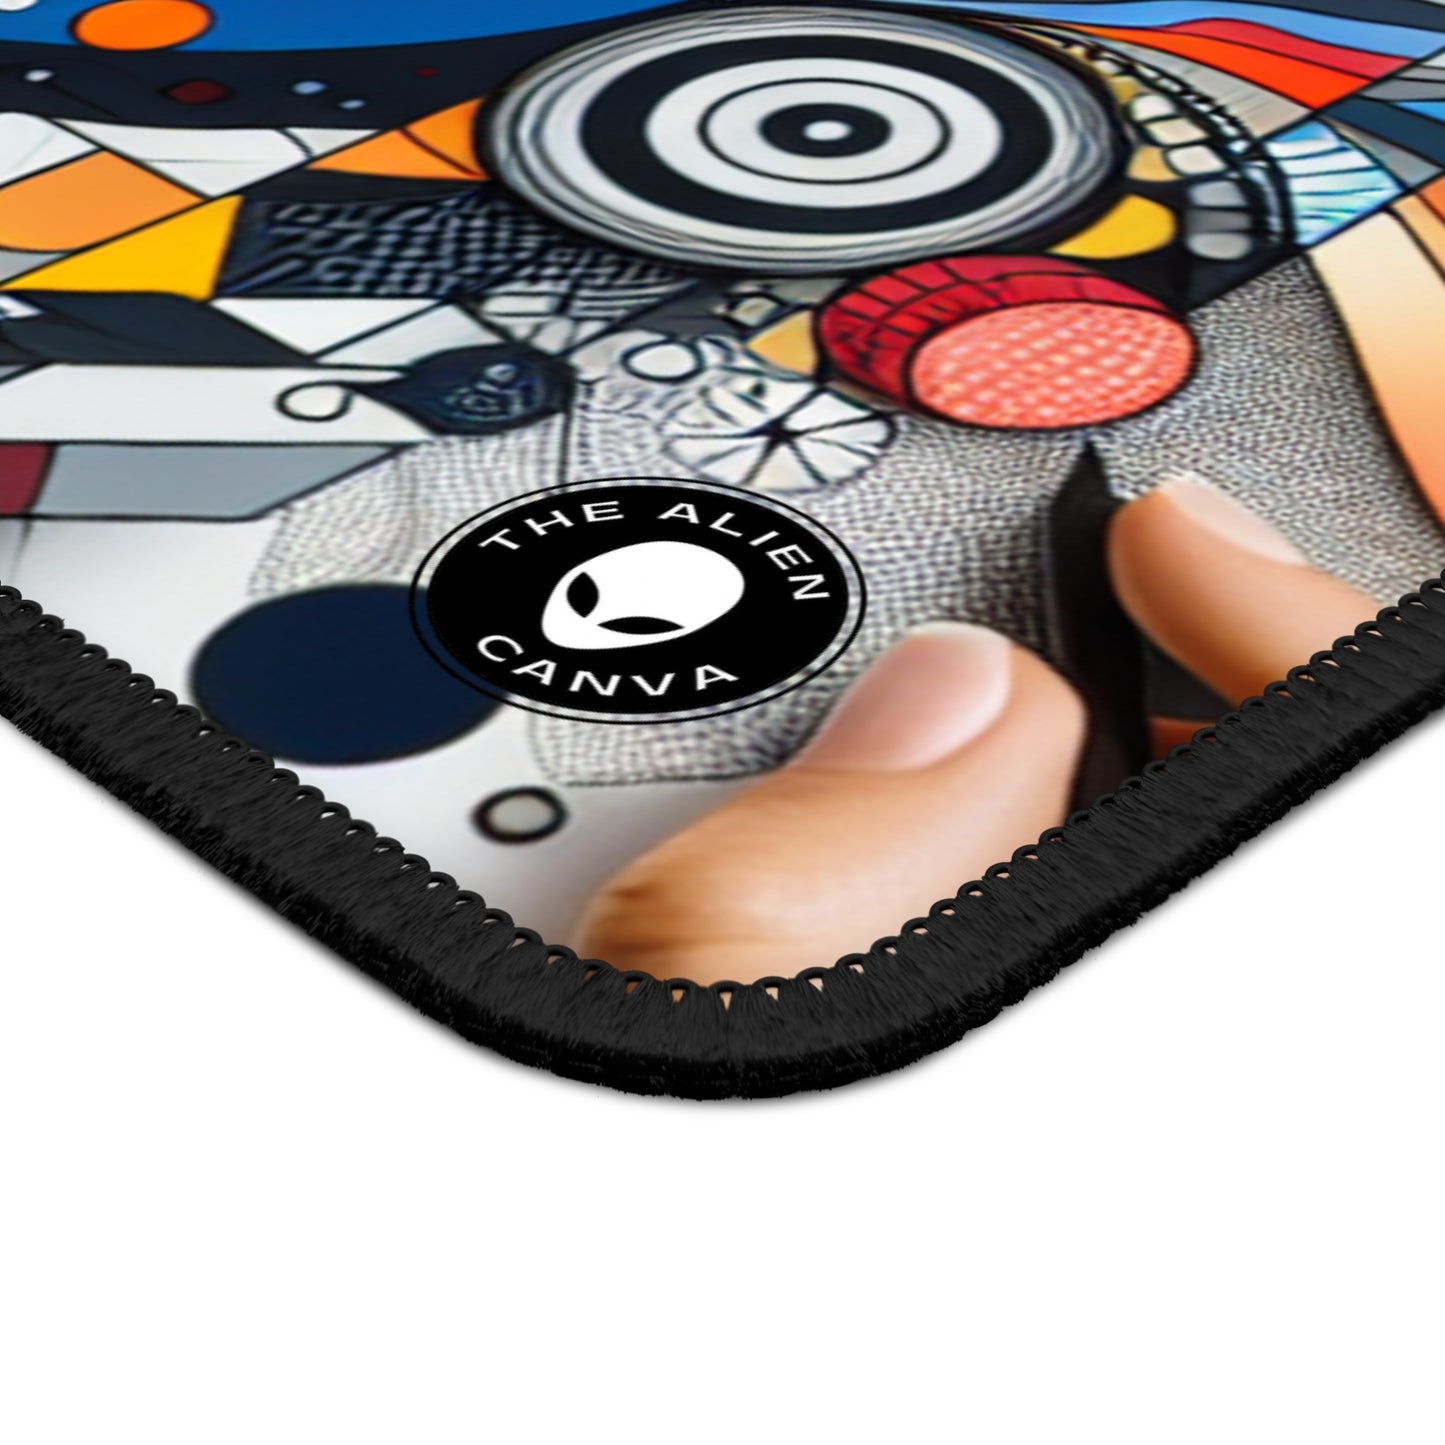 "ShapeSculptor: Interactive Geometric Art Creation" - The Alien Gaming Mouse Pad Interactive Art